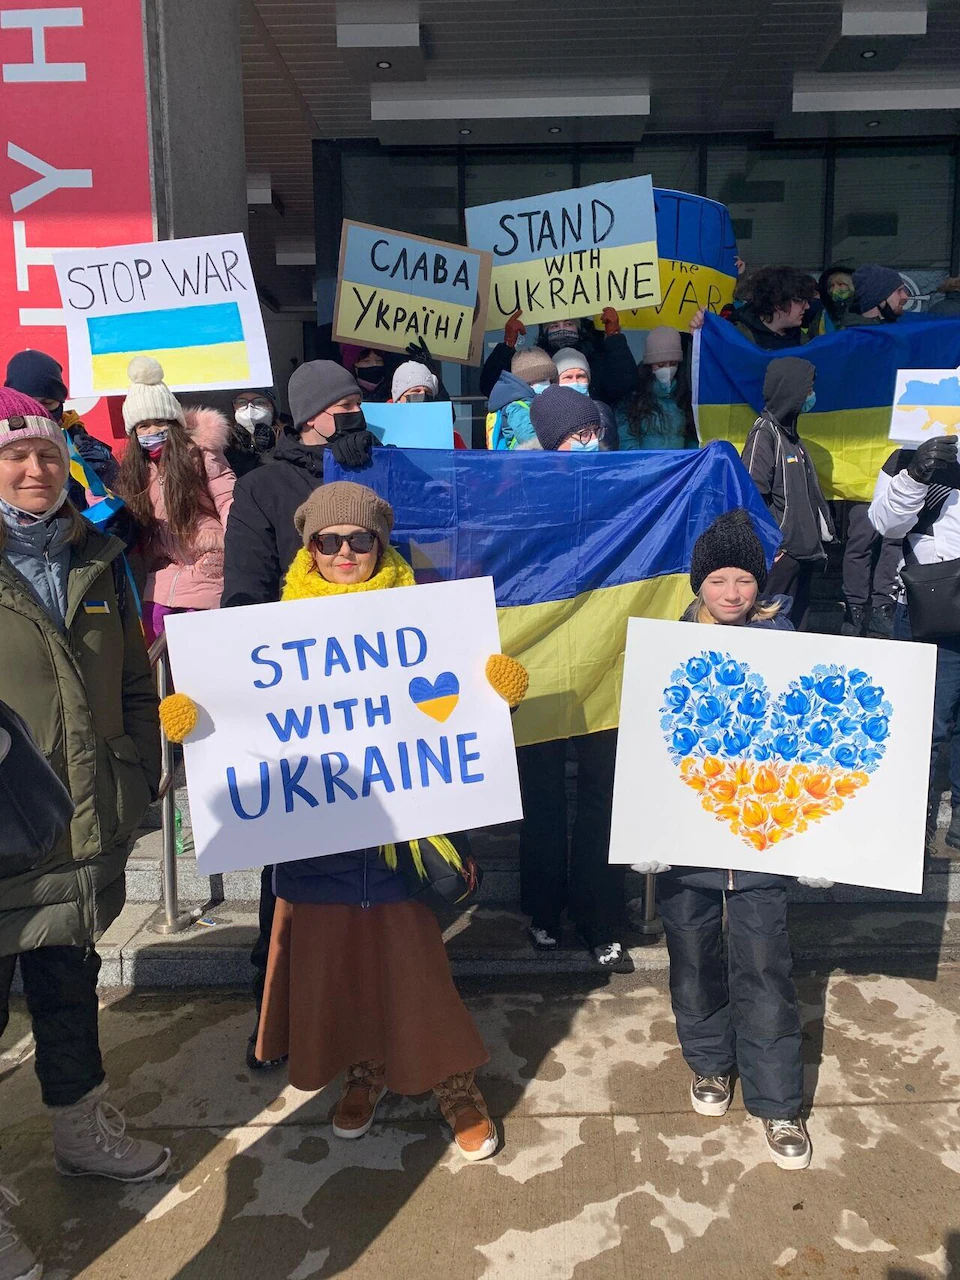 People gathered in a public square with blue and yellow signs, the colors of the Ukrainian flag.